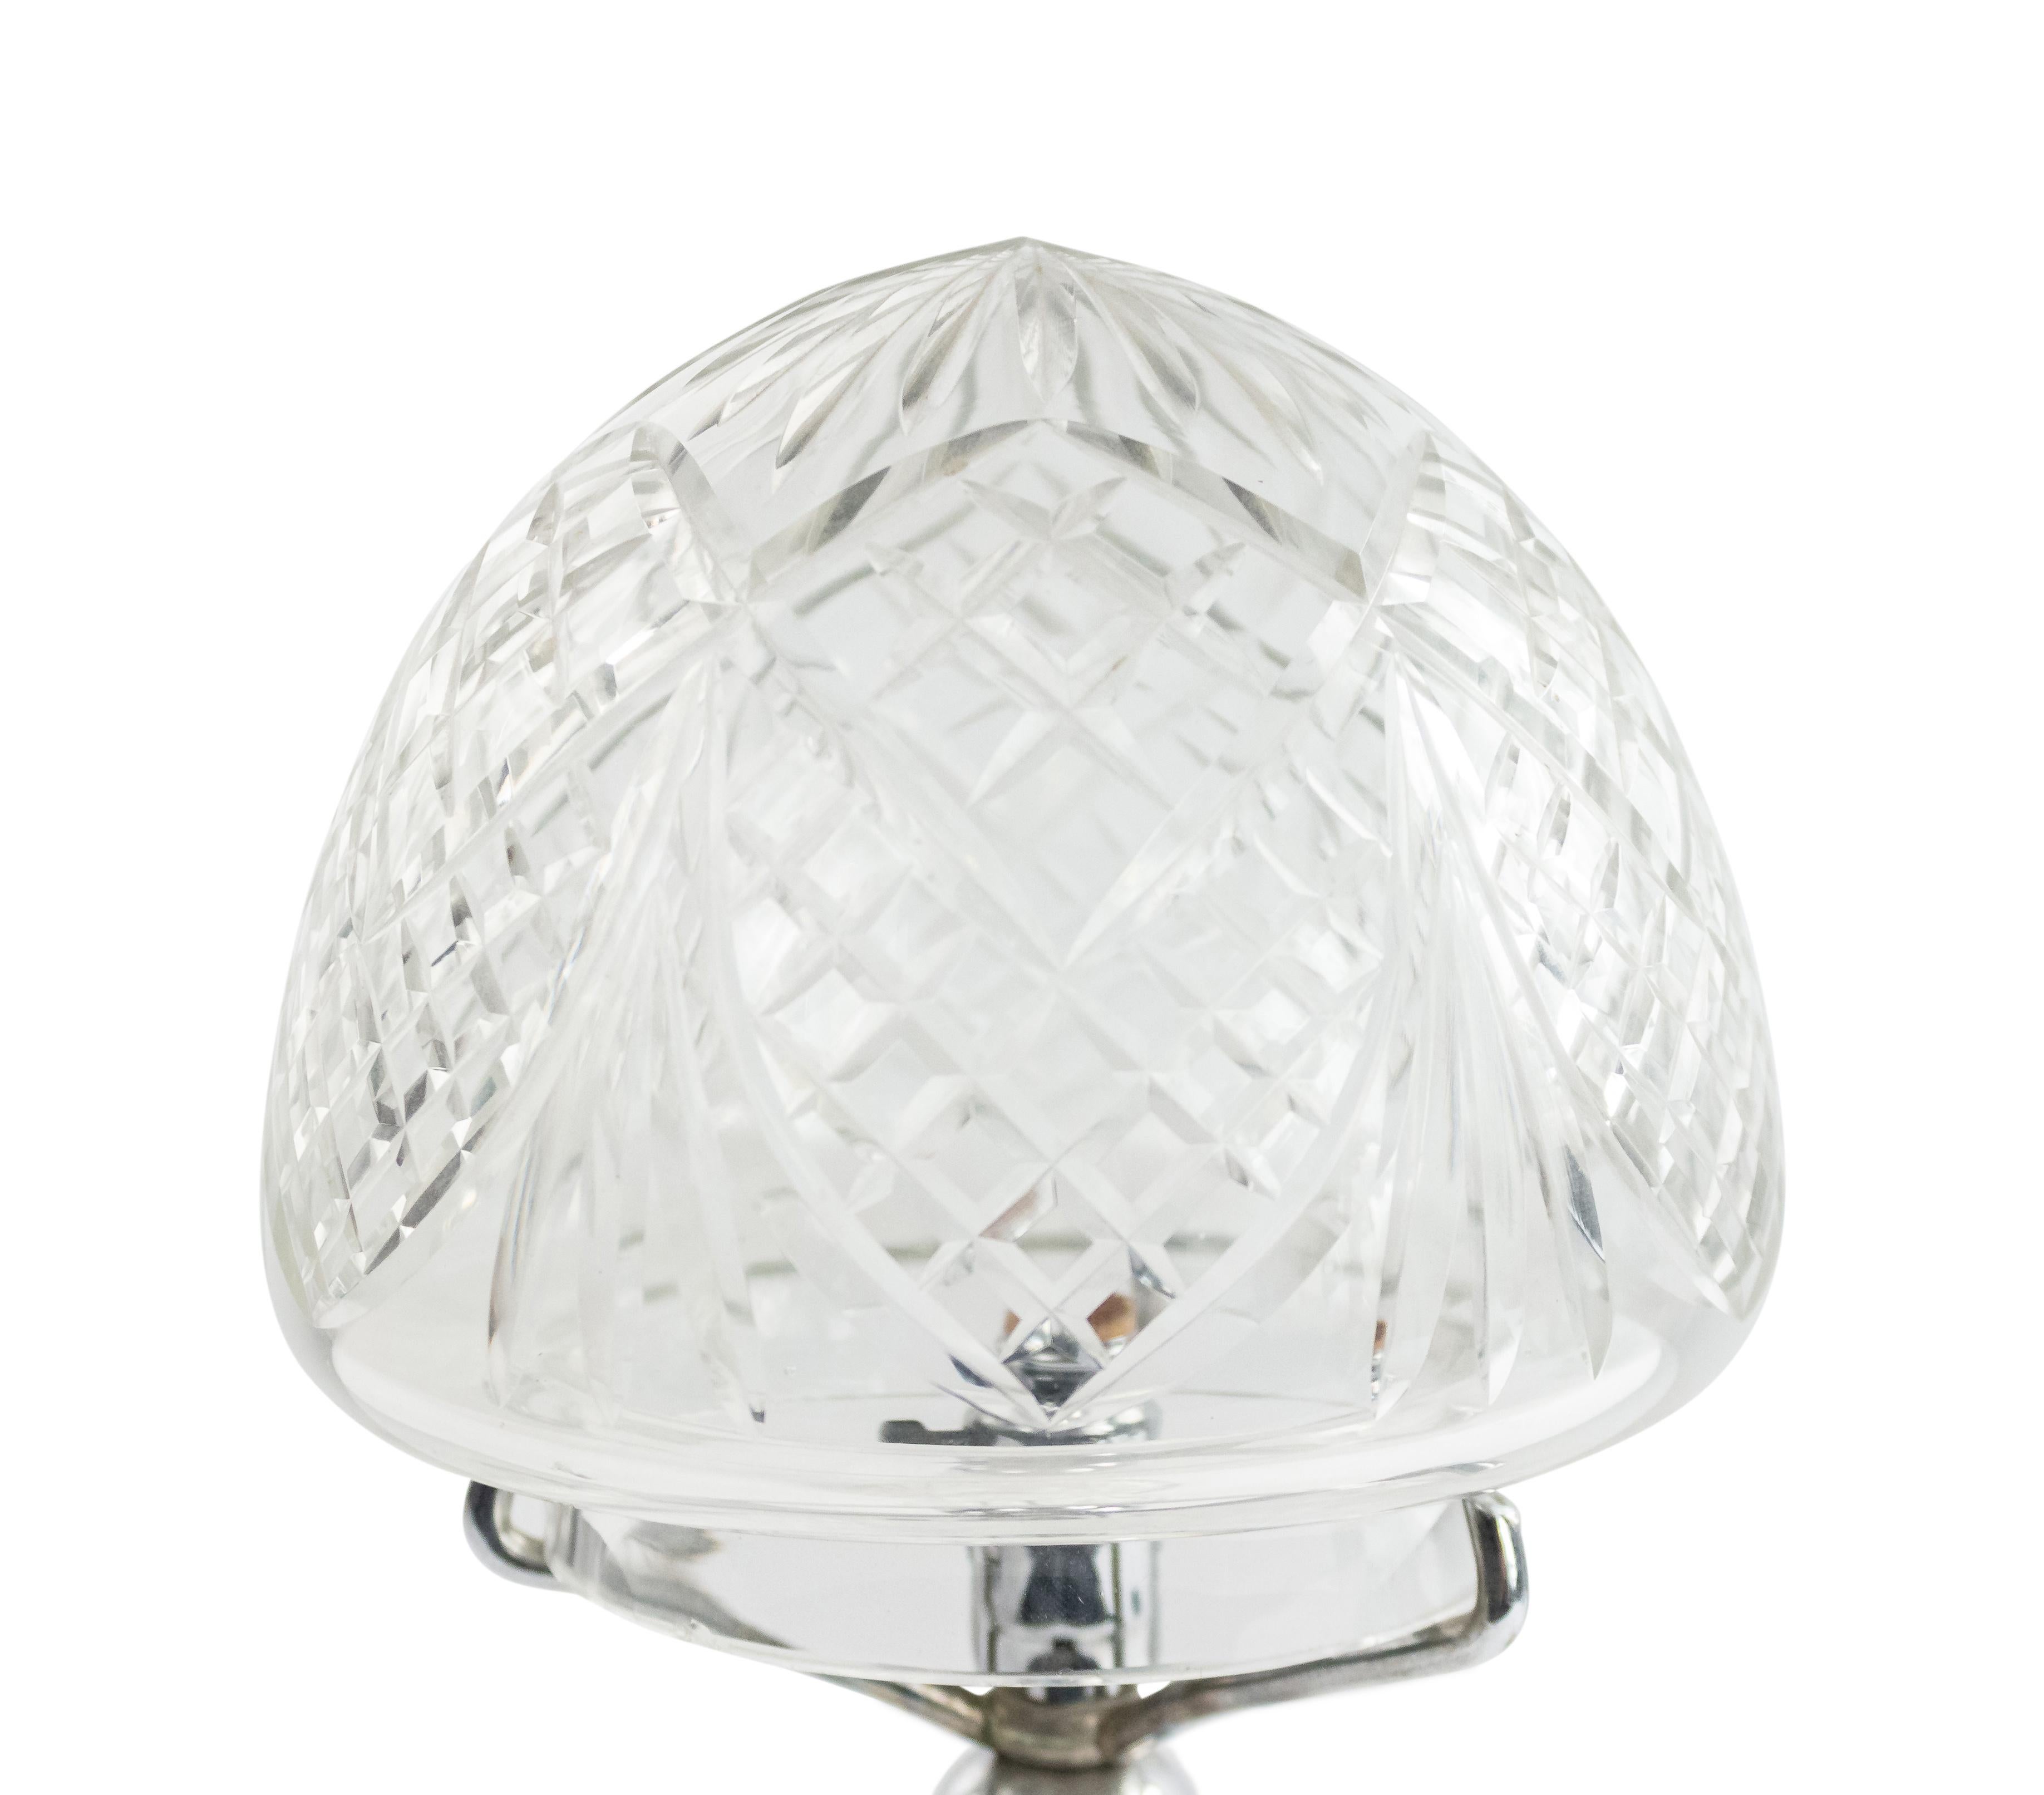 English Victorian cut crystal table lamp with dome shaped shade.